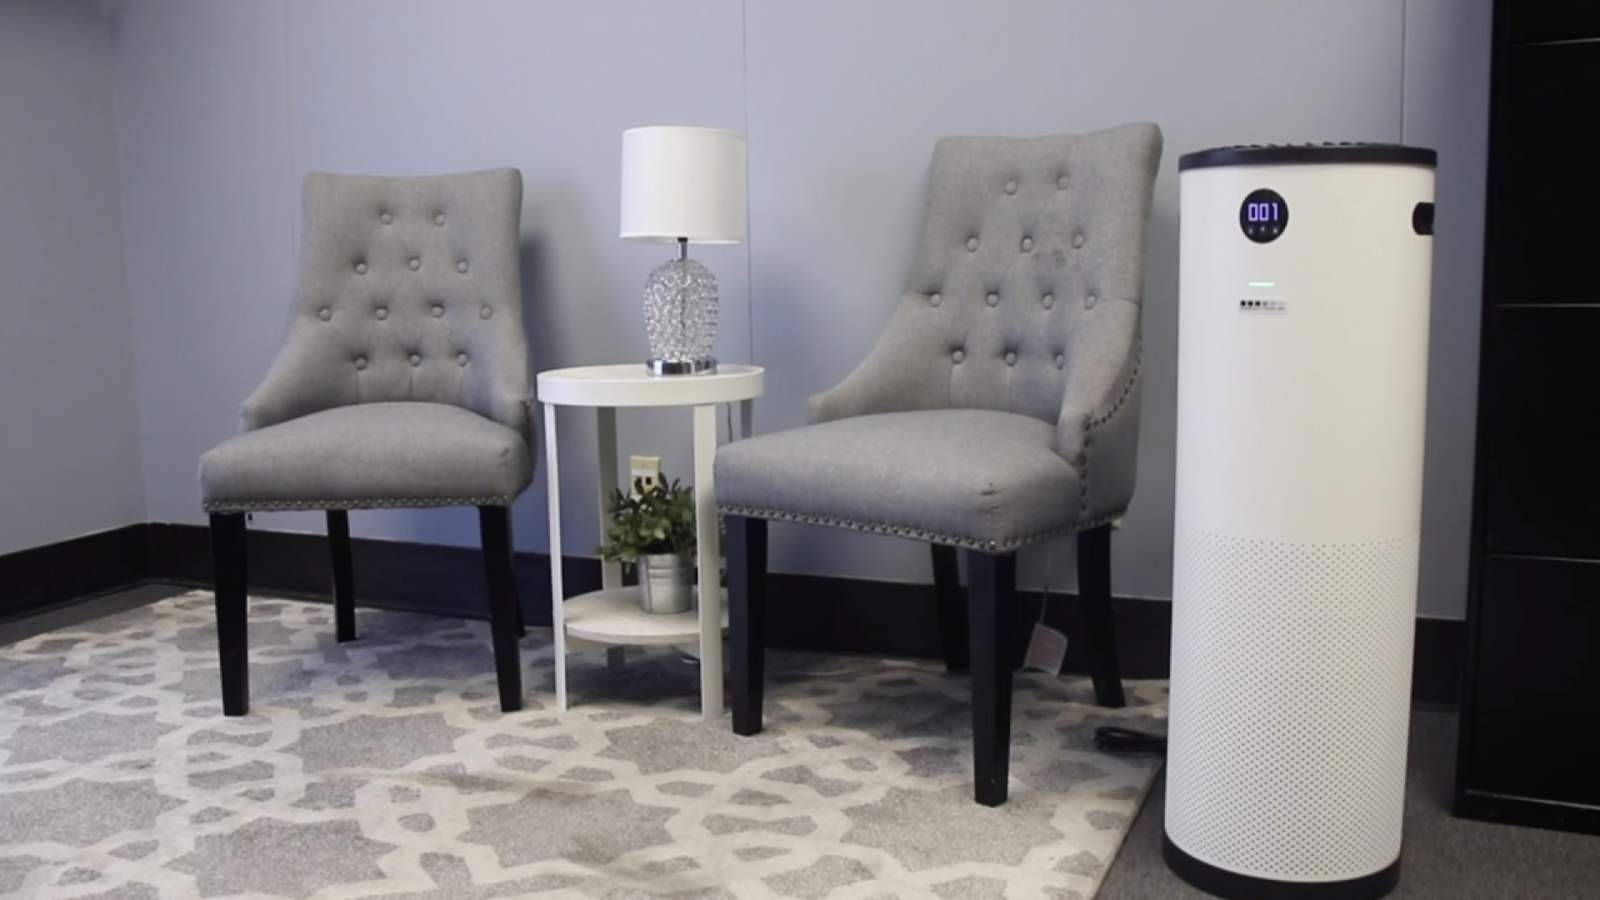 4 benefits an air purifier can have on your health, environment